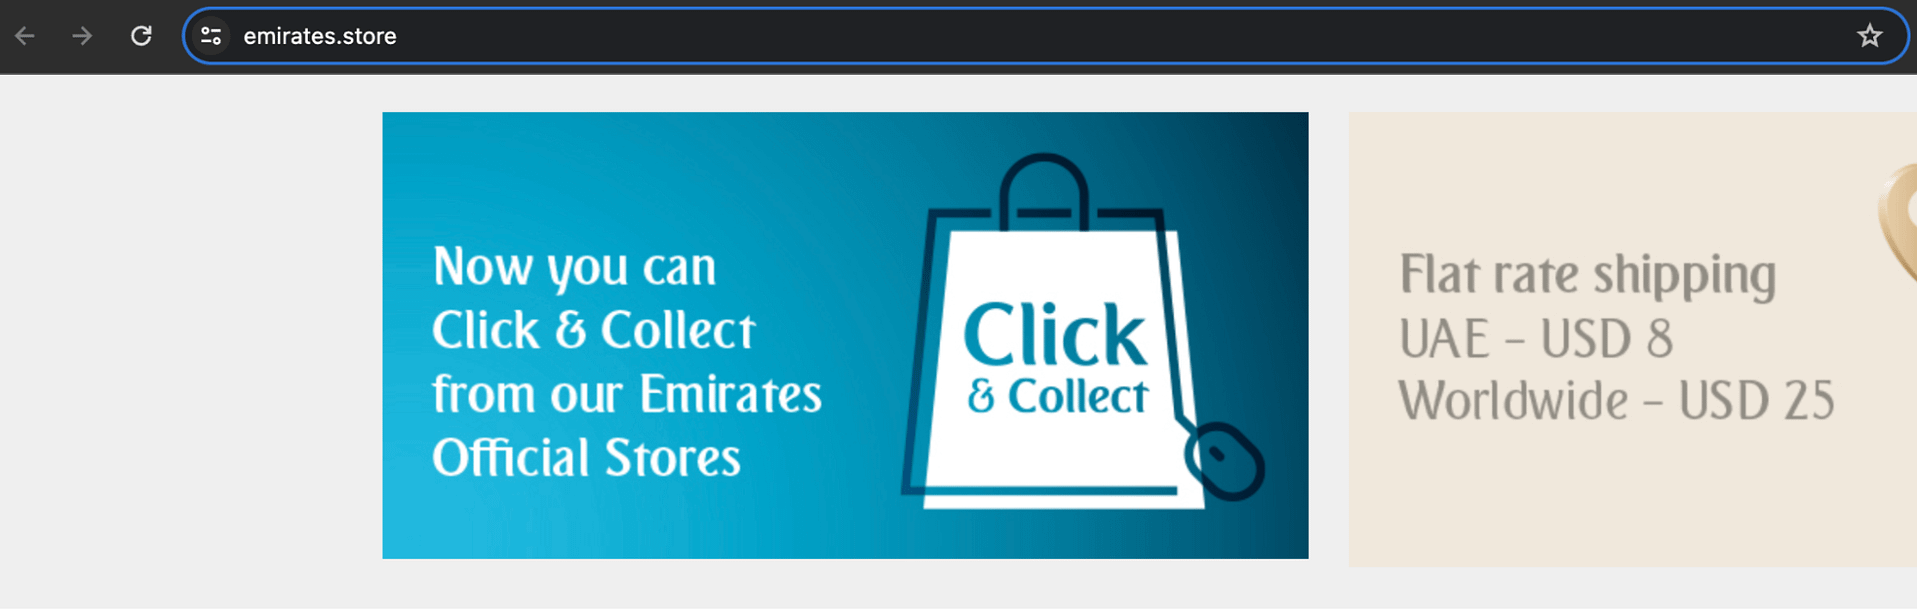 Example of emirates.store using a non-traditional TLD.